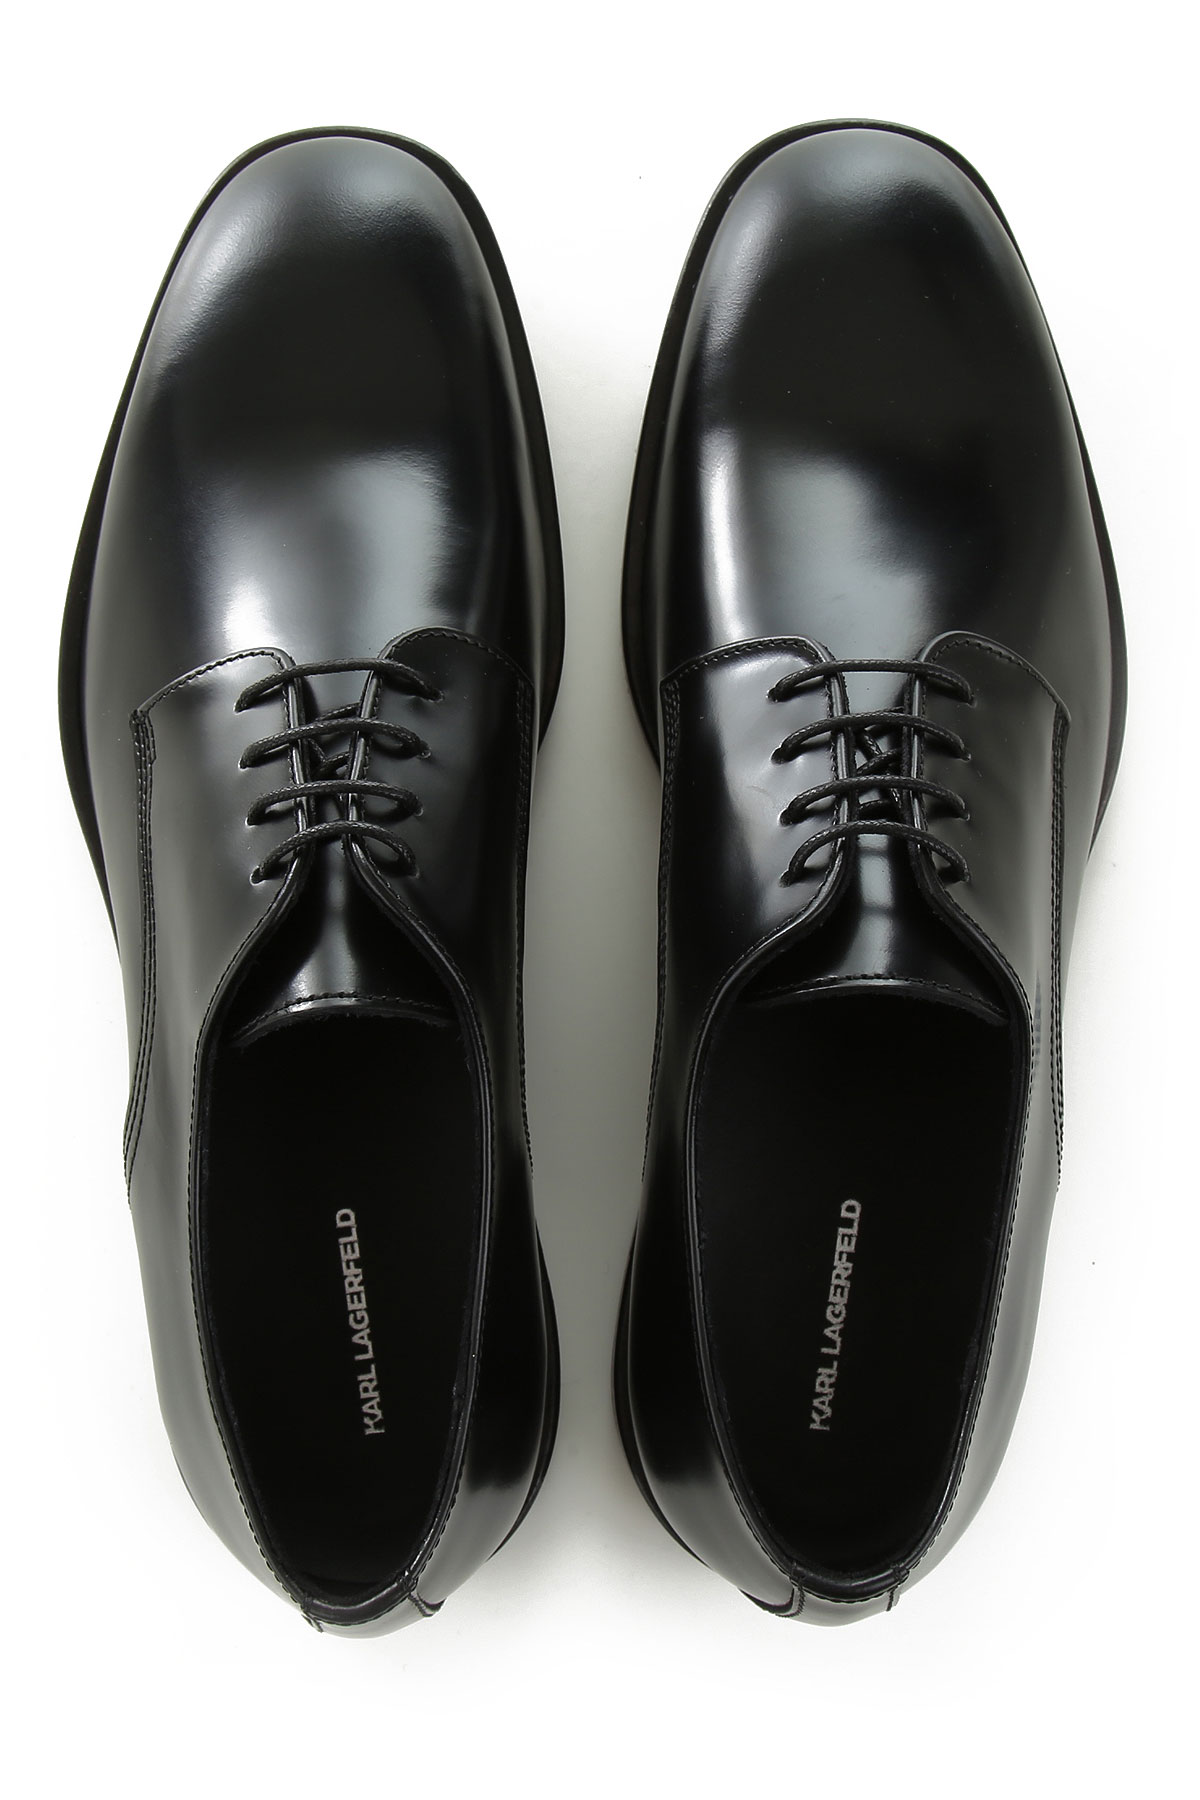 Mens Shoes Karl Lagerfeld, Style code: kl12224-000-